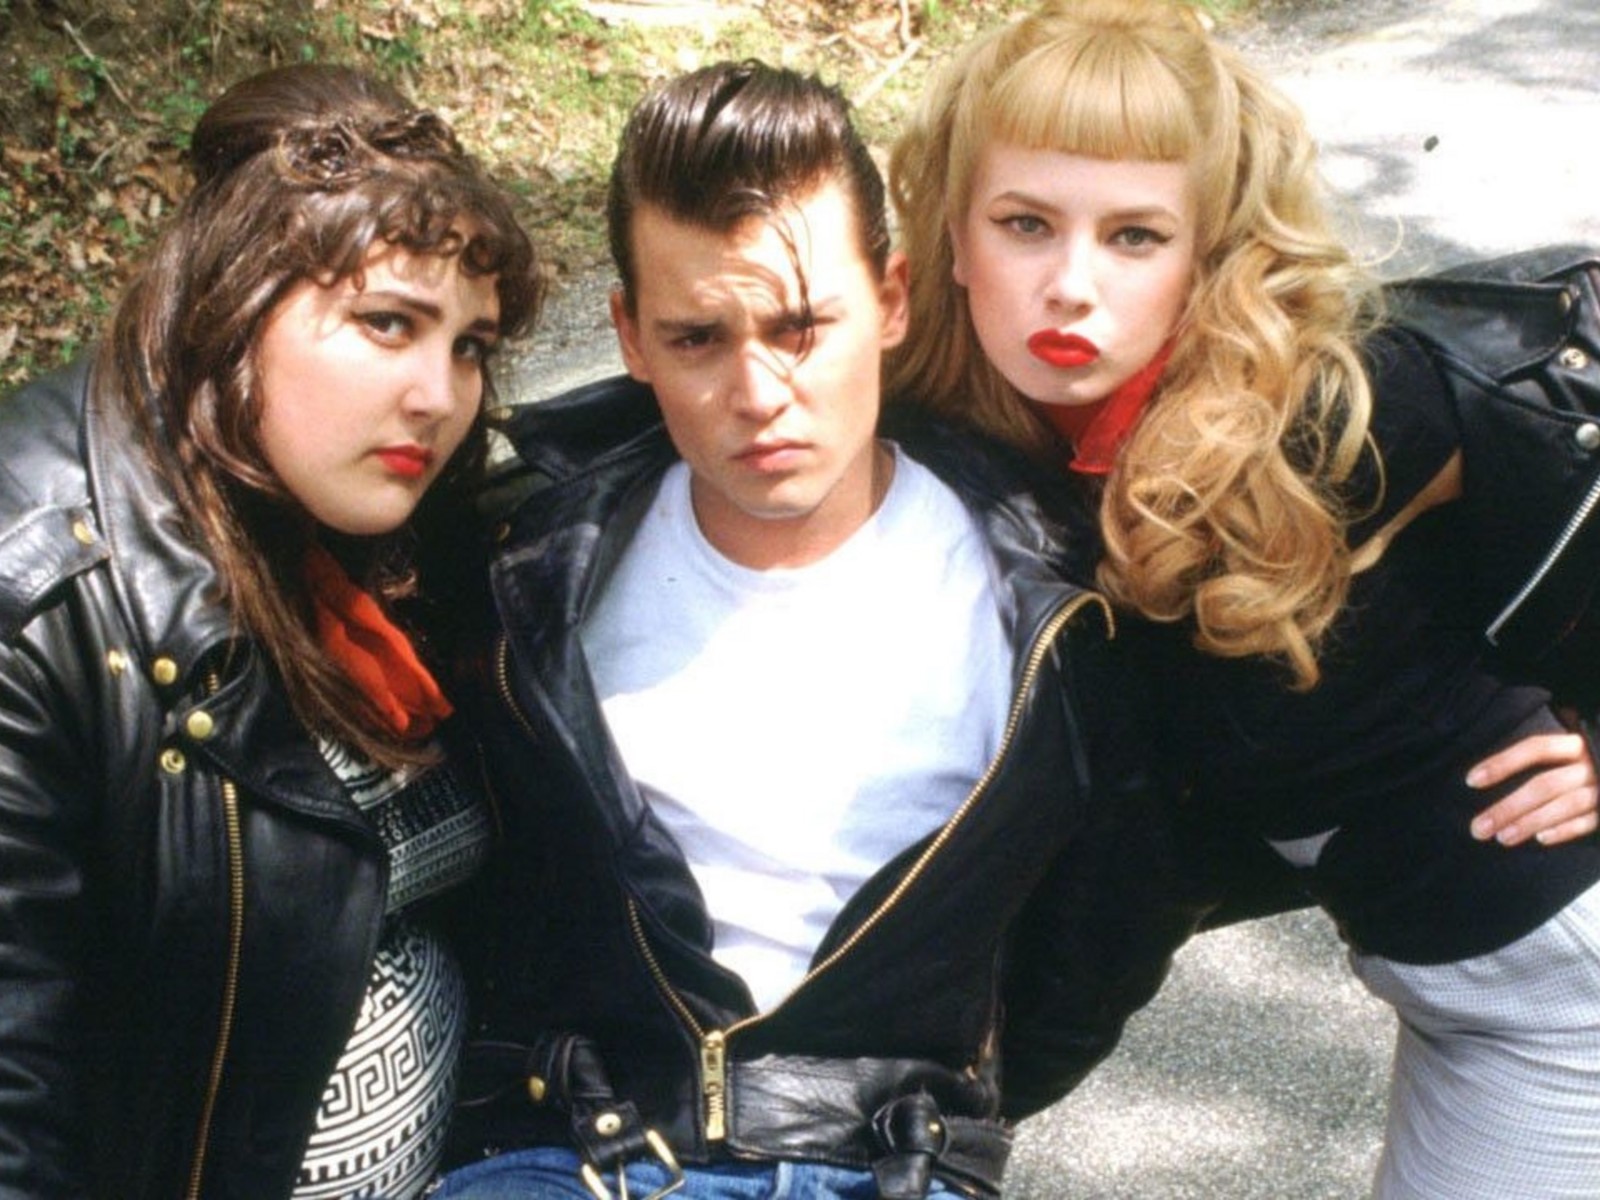 CRY-BABY (1990)